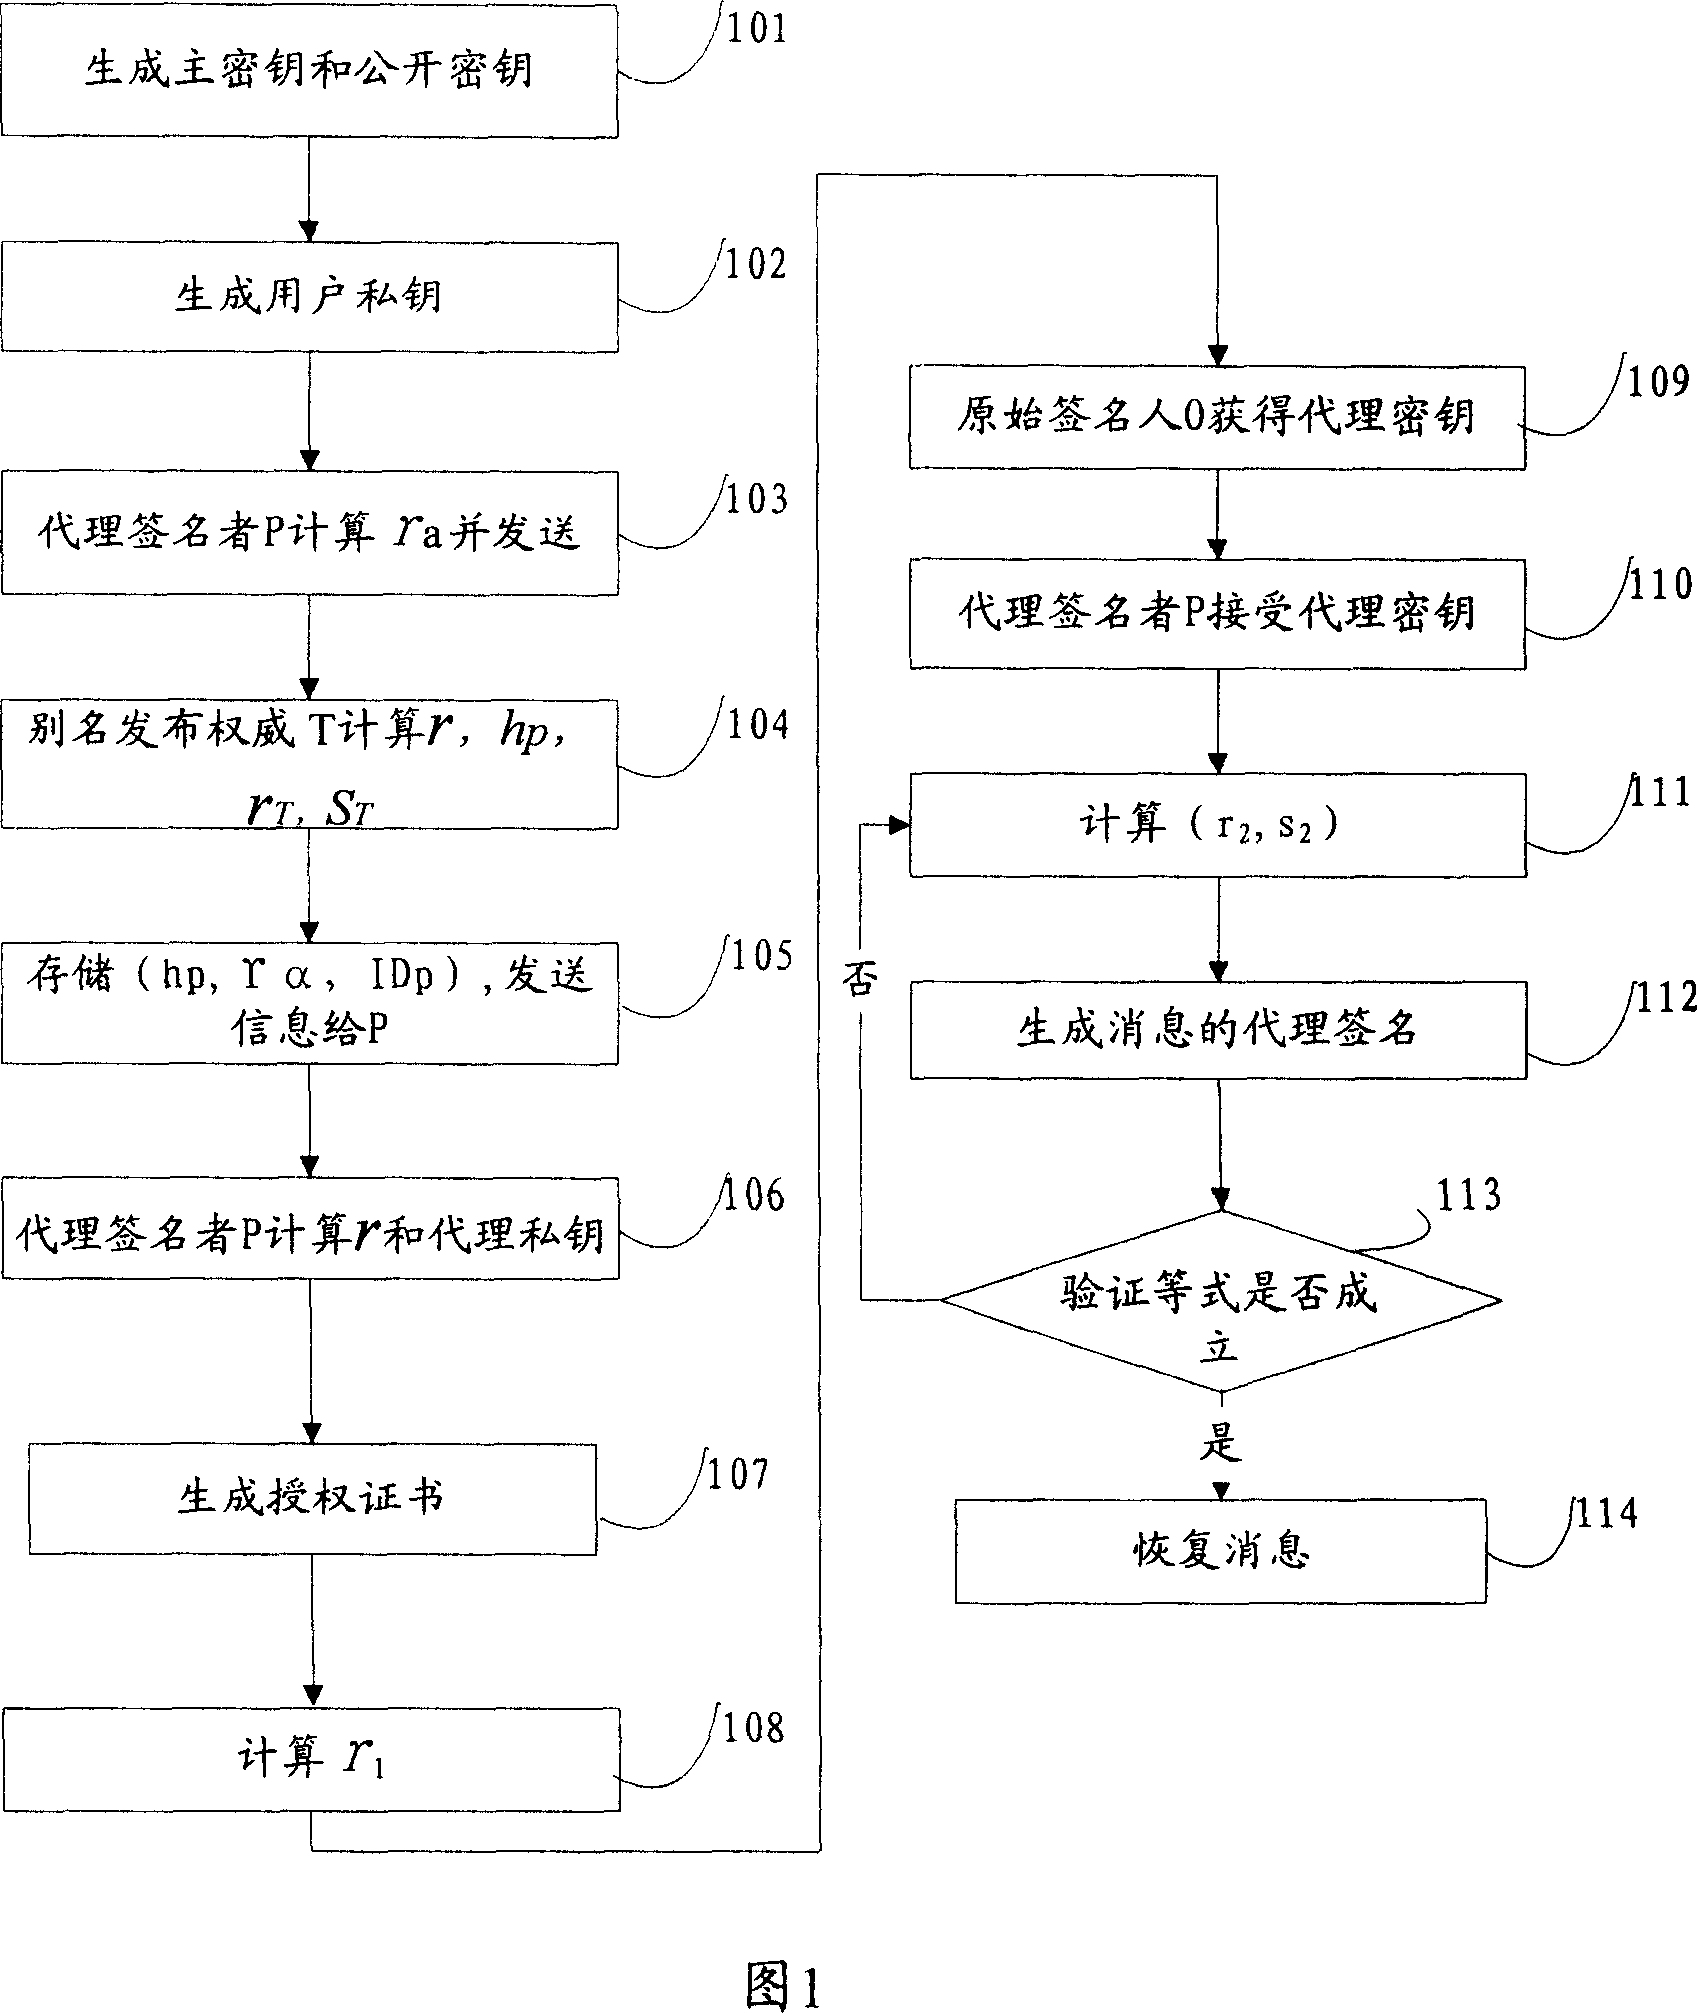 Method and system for agent signature